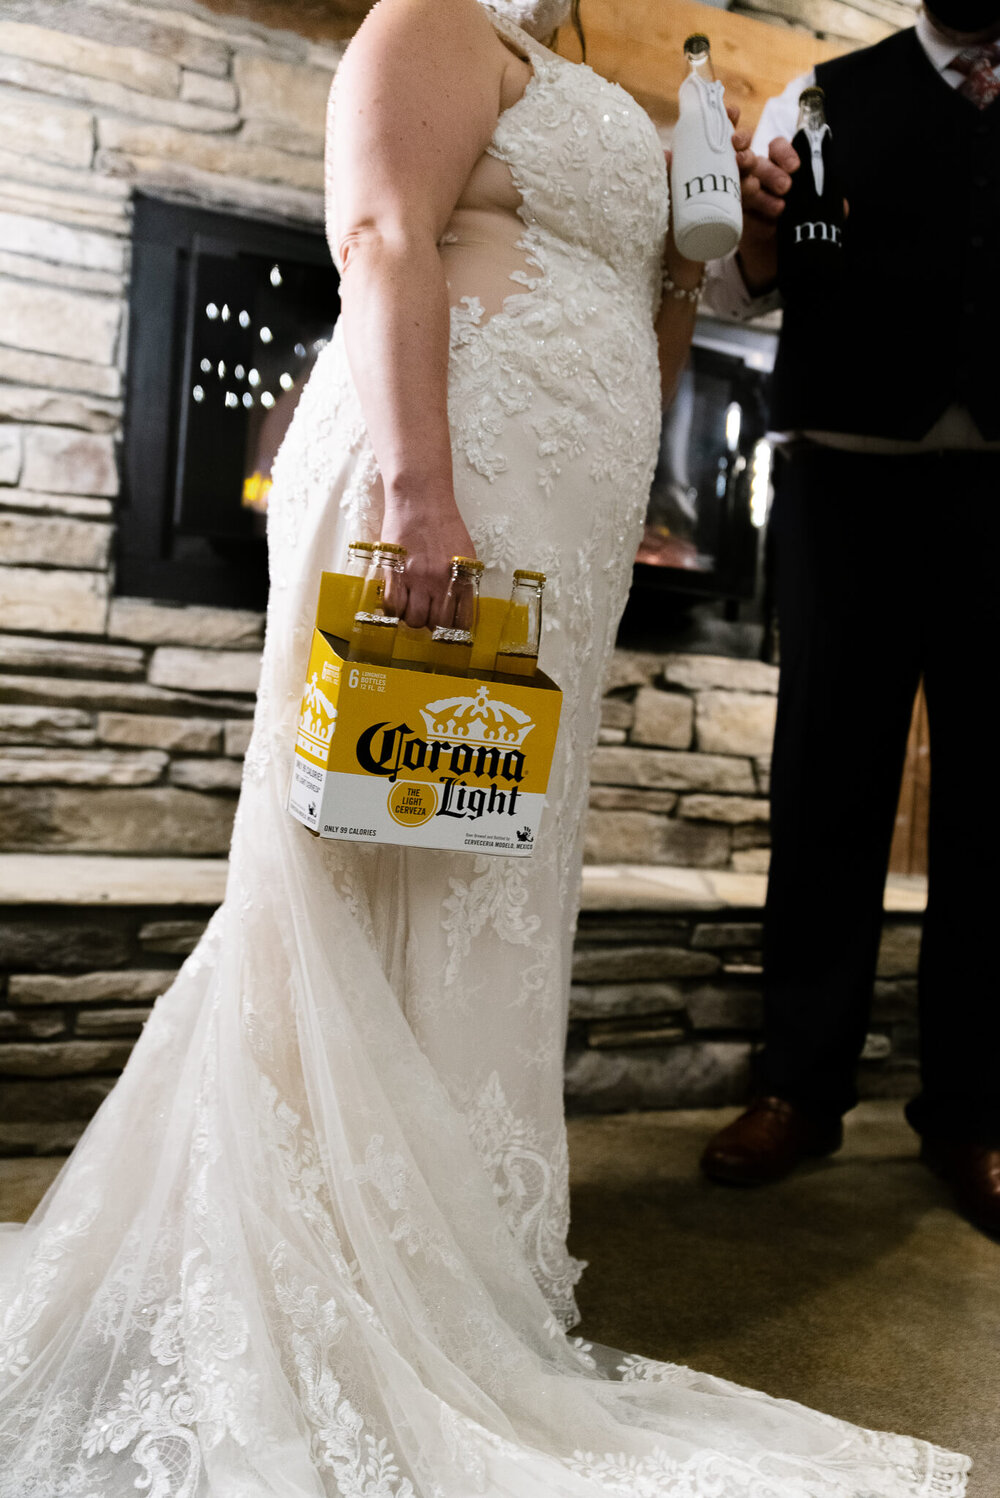 Bride holding case of corona light beer bottles in her wedding dress at The Parker Mill in Whittier, NC